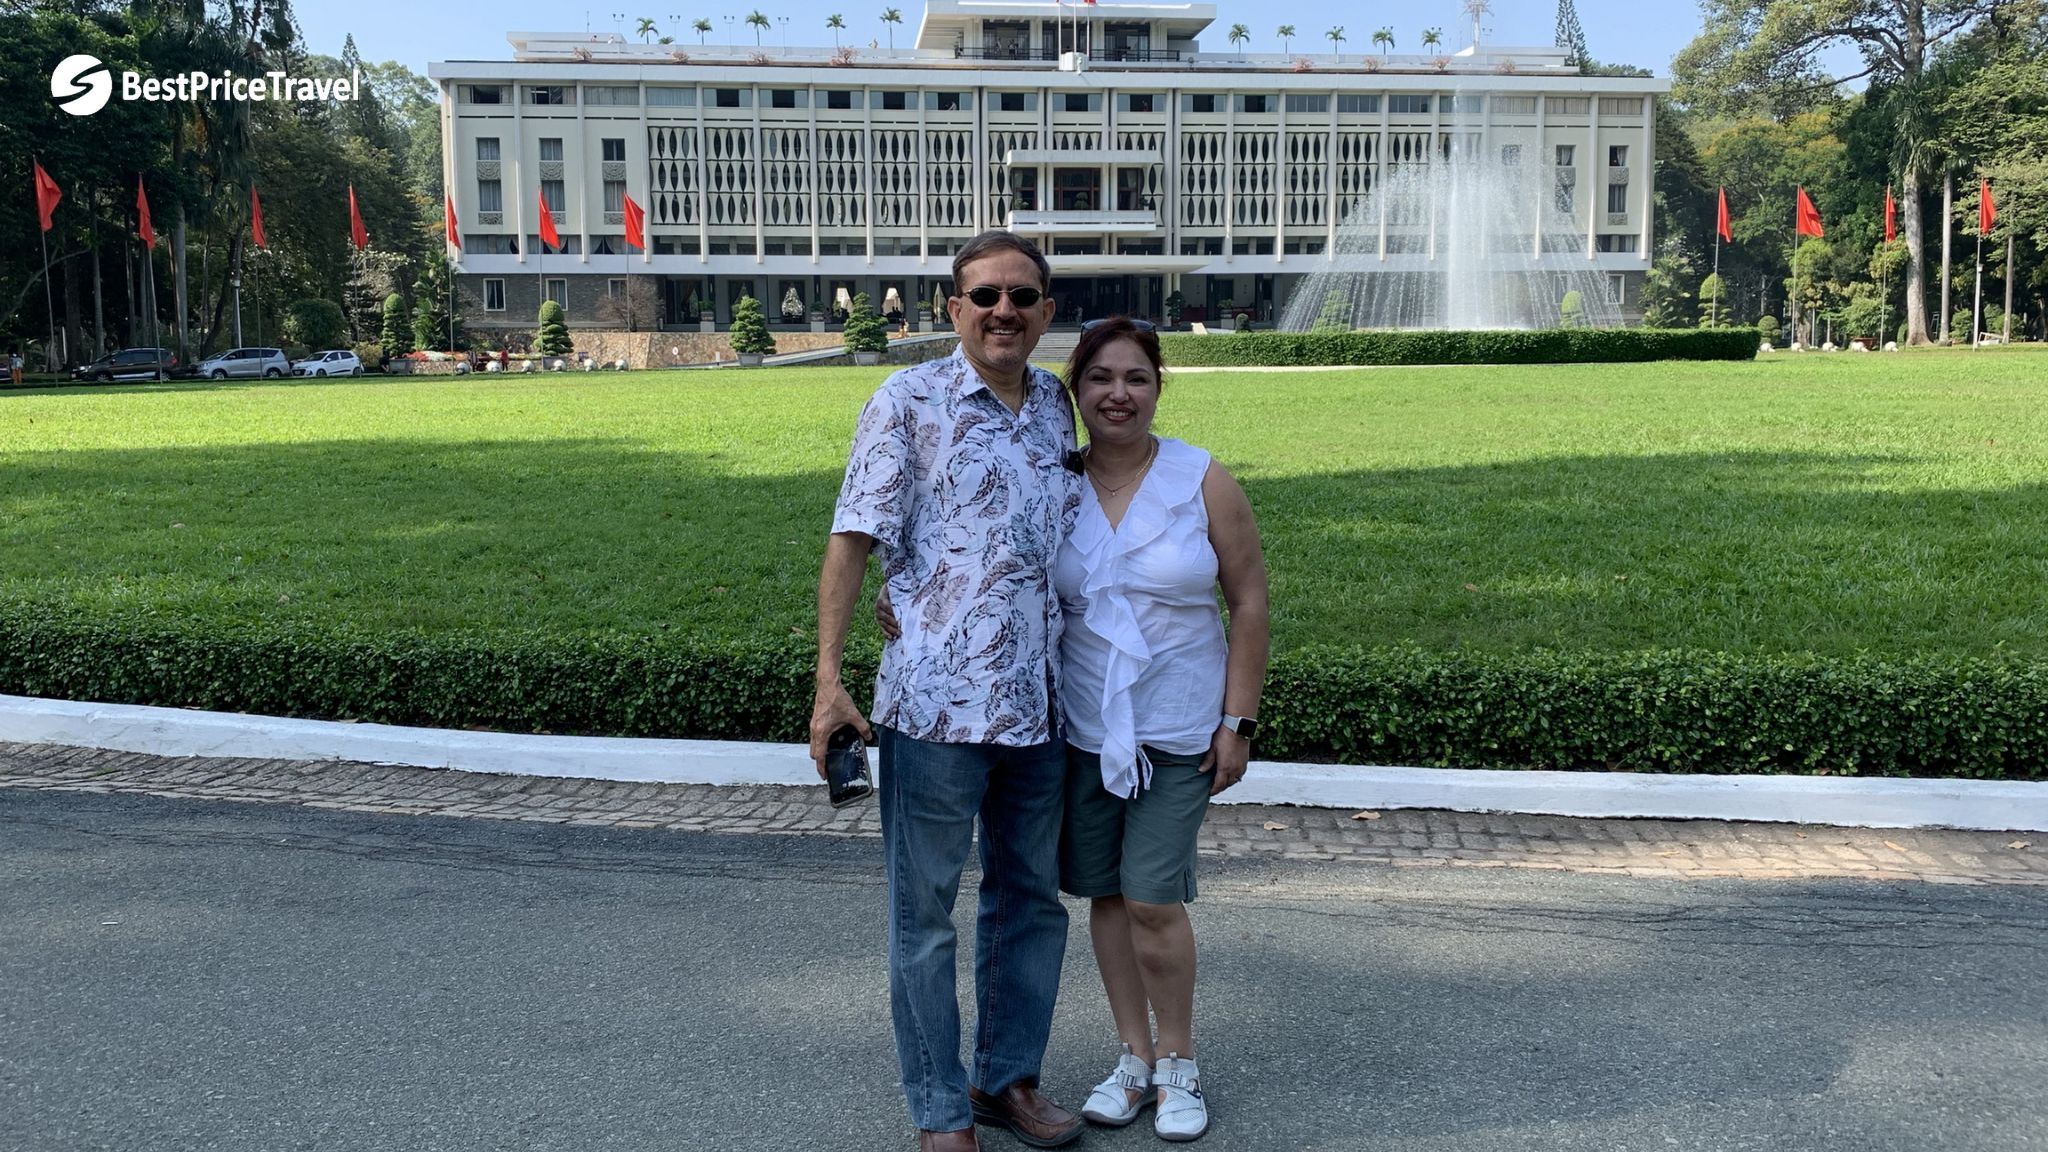 Day 7 Independence Palace, A Monument That Witnessed Significant Changes In Saigon's History